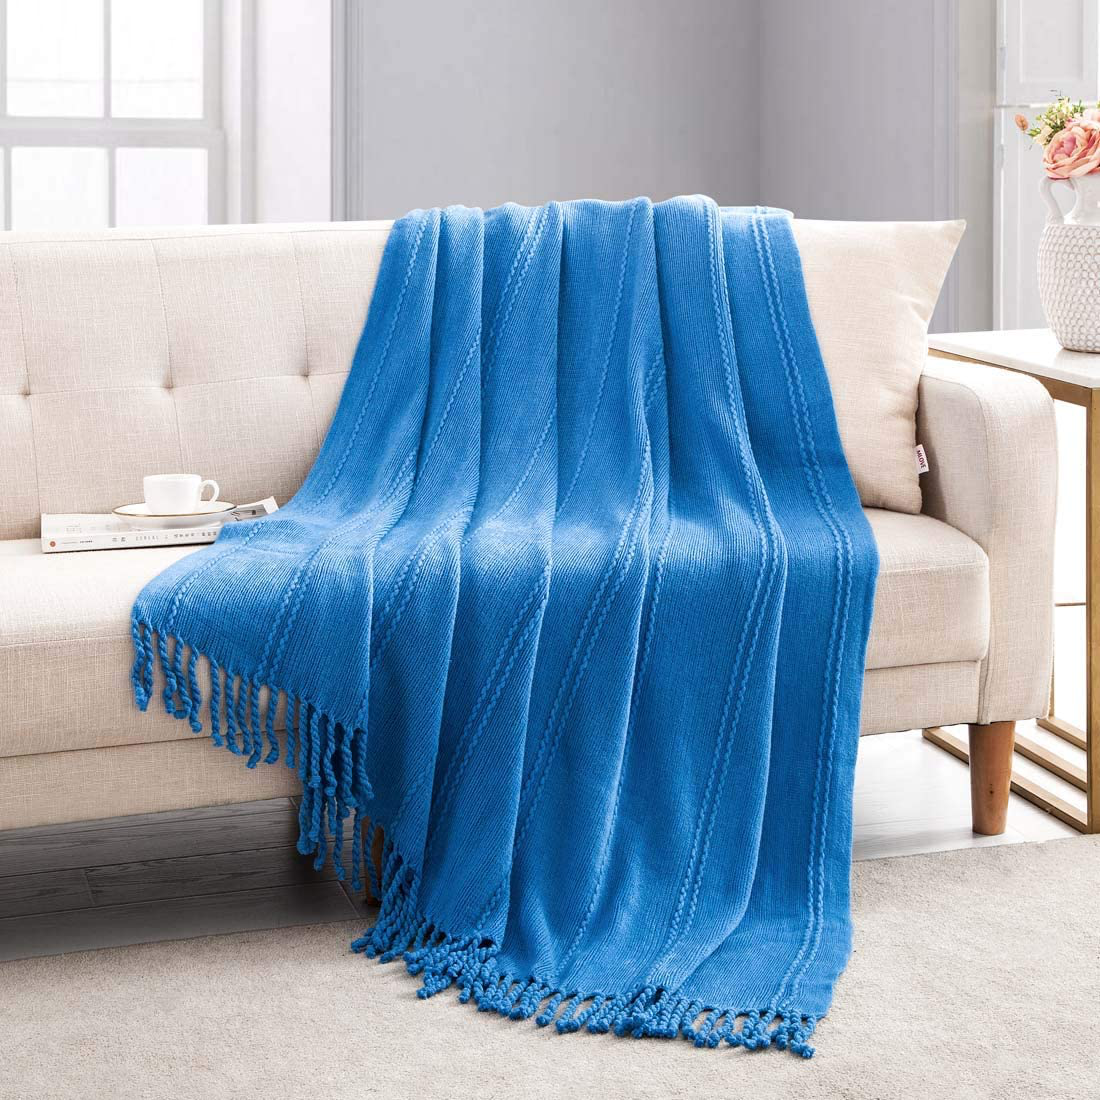 Revdomfly Knitted Throw Blanket Royal Blue Farmhouse Woven Blankets with Fringe Tassels for Couch Bed, 47" x 67", Royal Blue